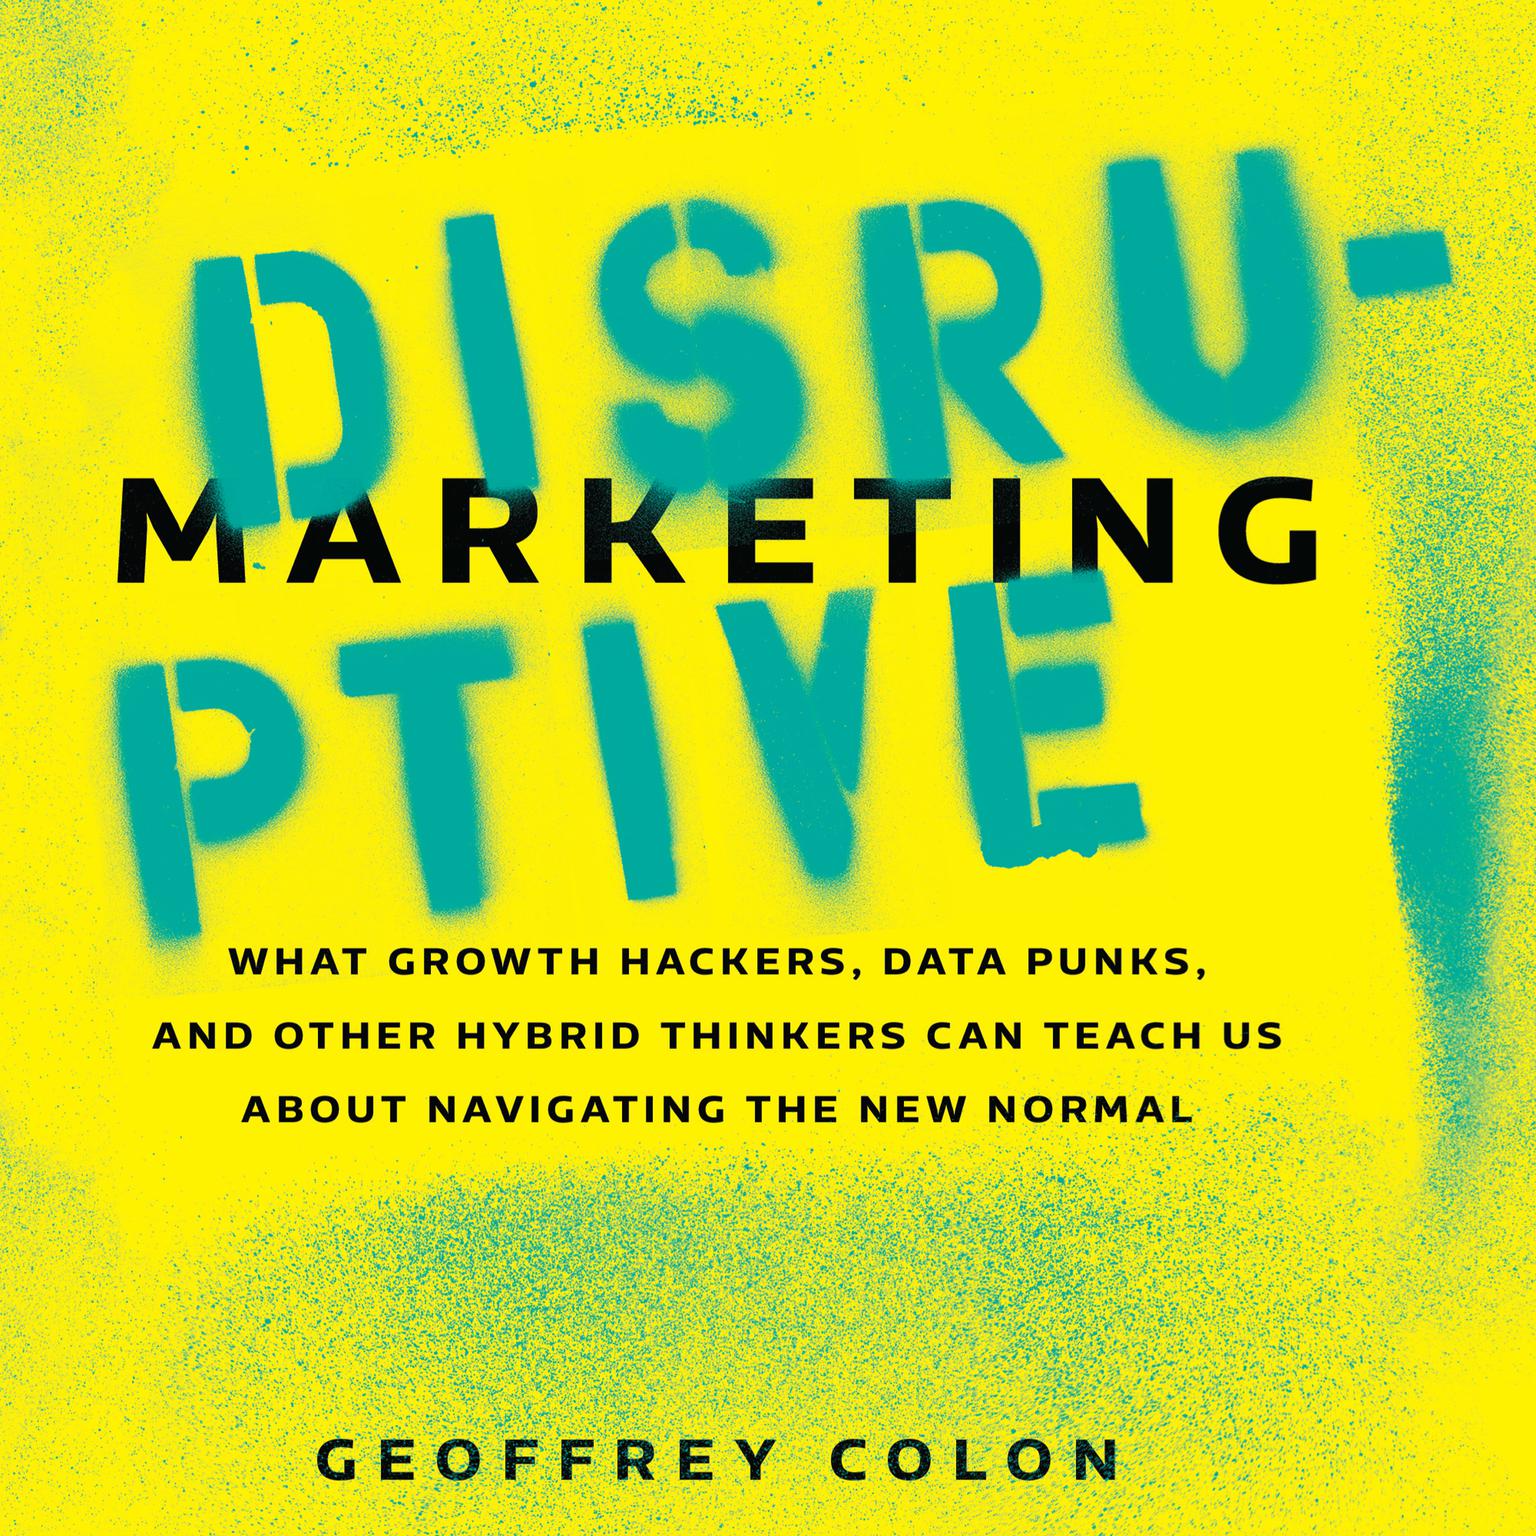 Disruptive Marketing: What Growth Hackers, Data Punks, and Other Hybrid Thinkers Can Teach Us About Navigating the New Normal Audiobook, by Geoffrey Colon